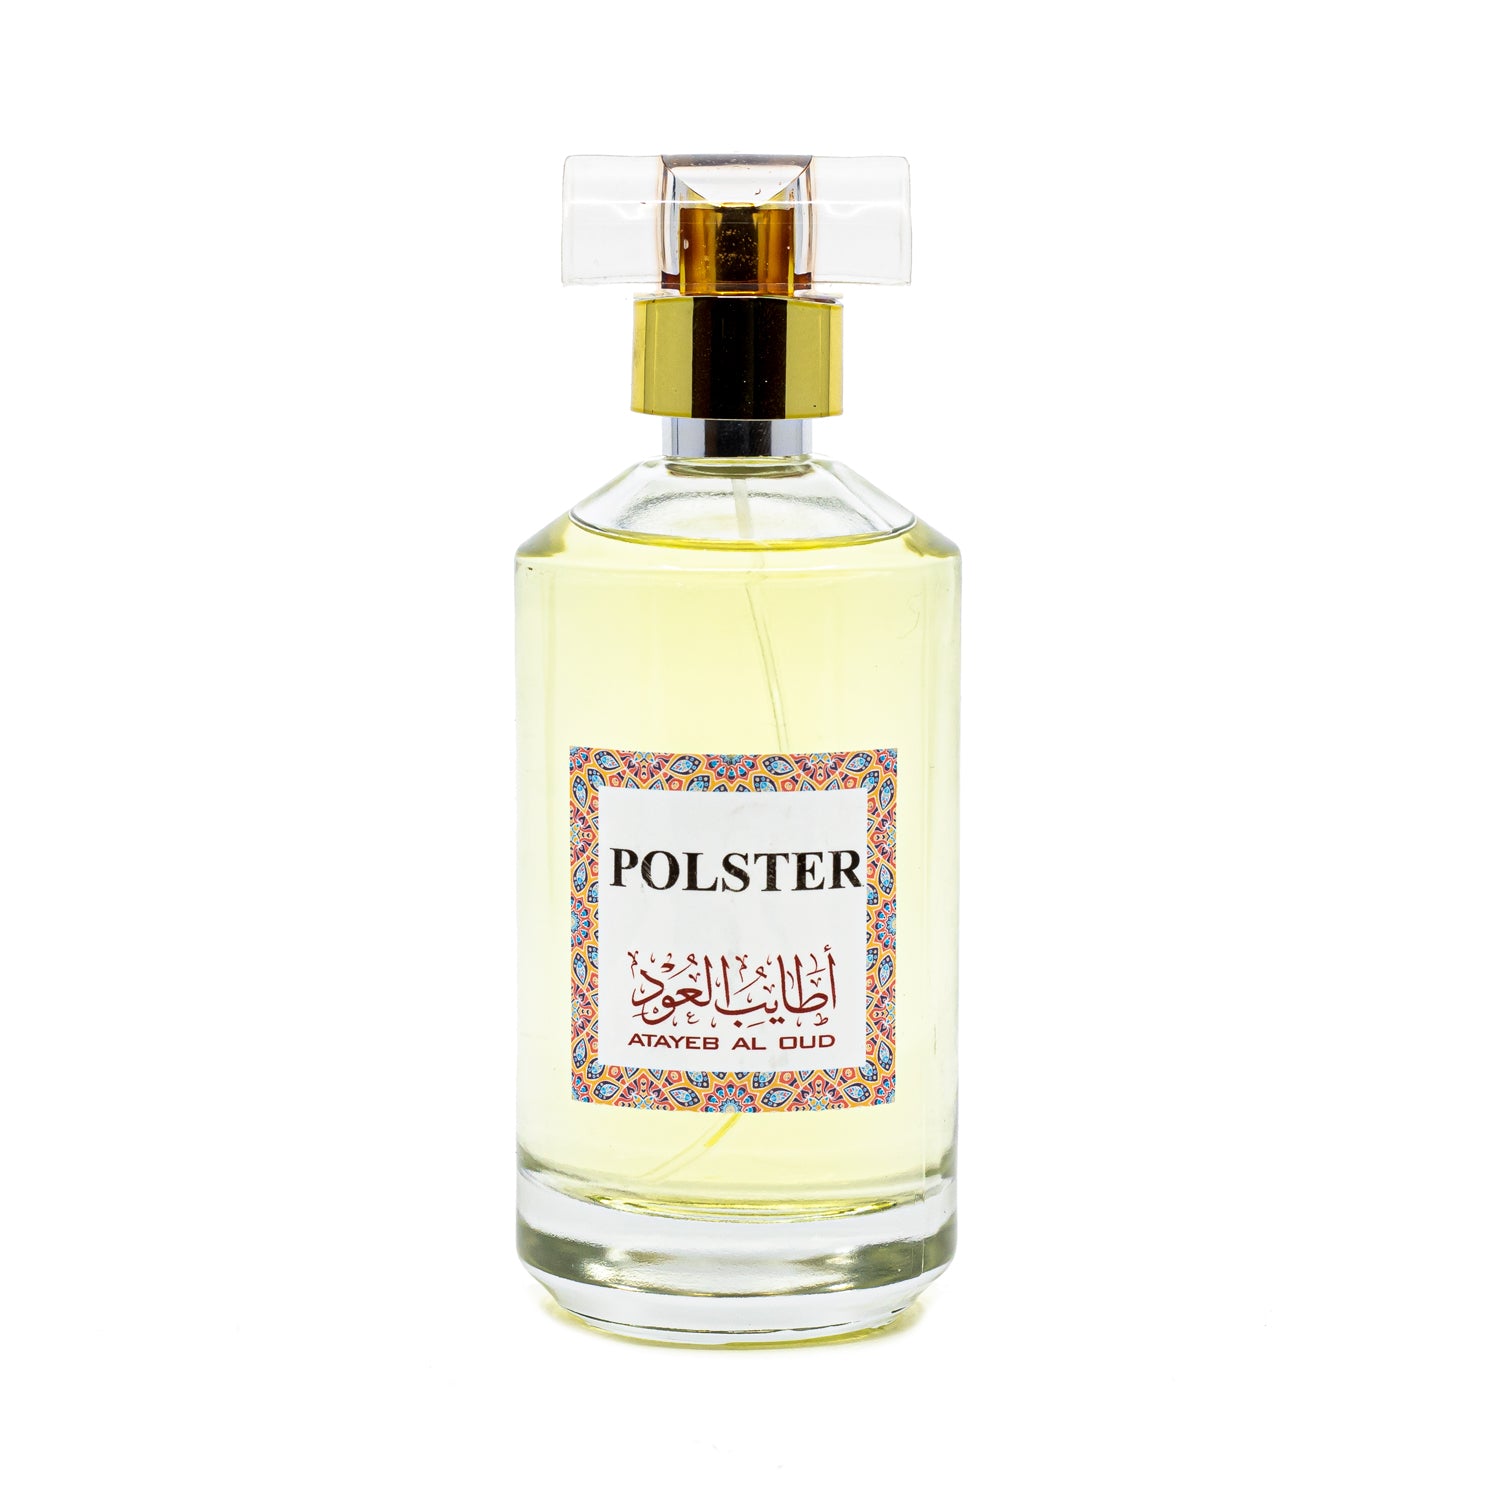 Polster 100 ML - POLSTER-AO-05198 | fragrance | luxury | beauty | captivating scent | long-lasting | elegance | alluring aroma | gender-neutral | olfactory masterpiece | Halabh.com